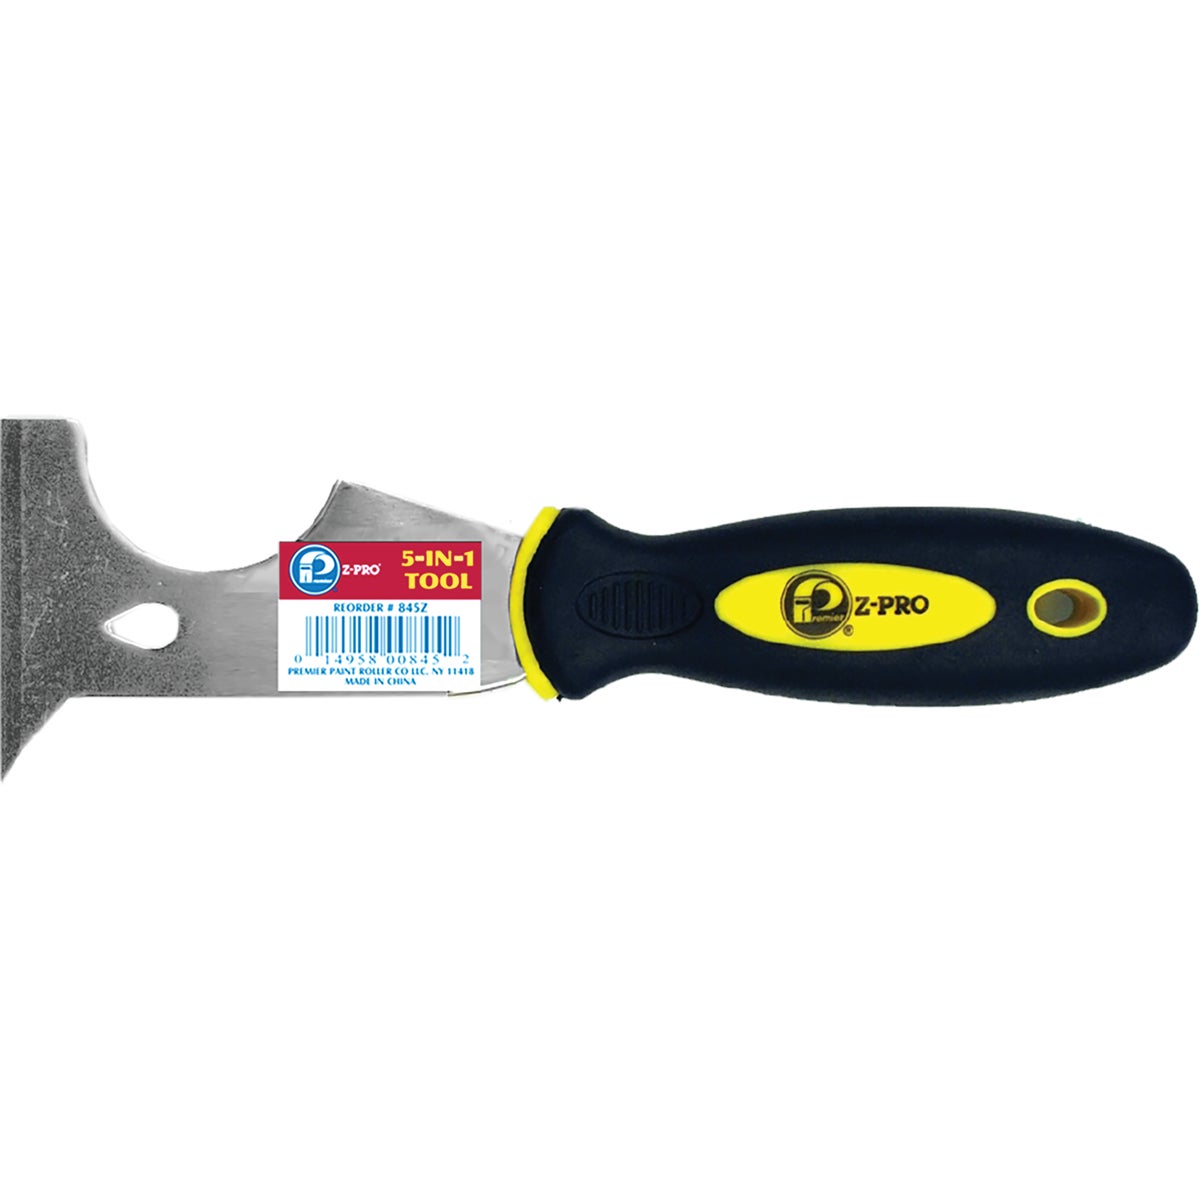 Item 777112, This multipurpose tool can be used for scraping, spreading, roller cover 